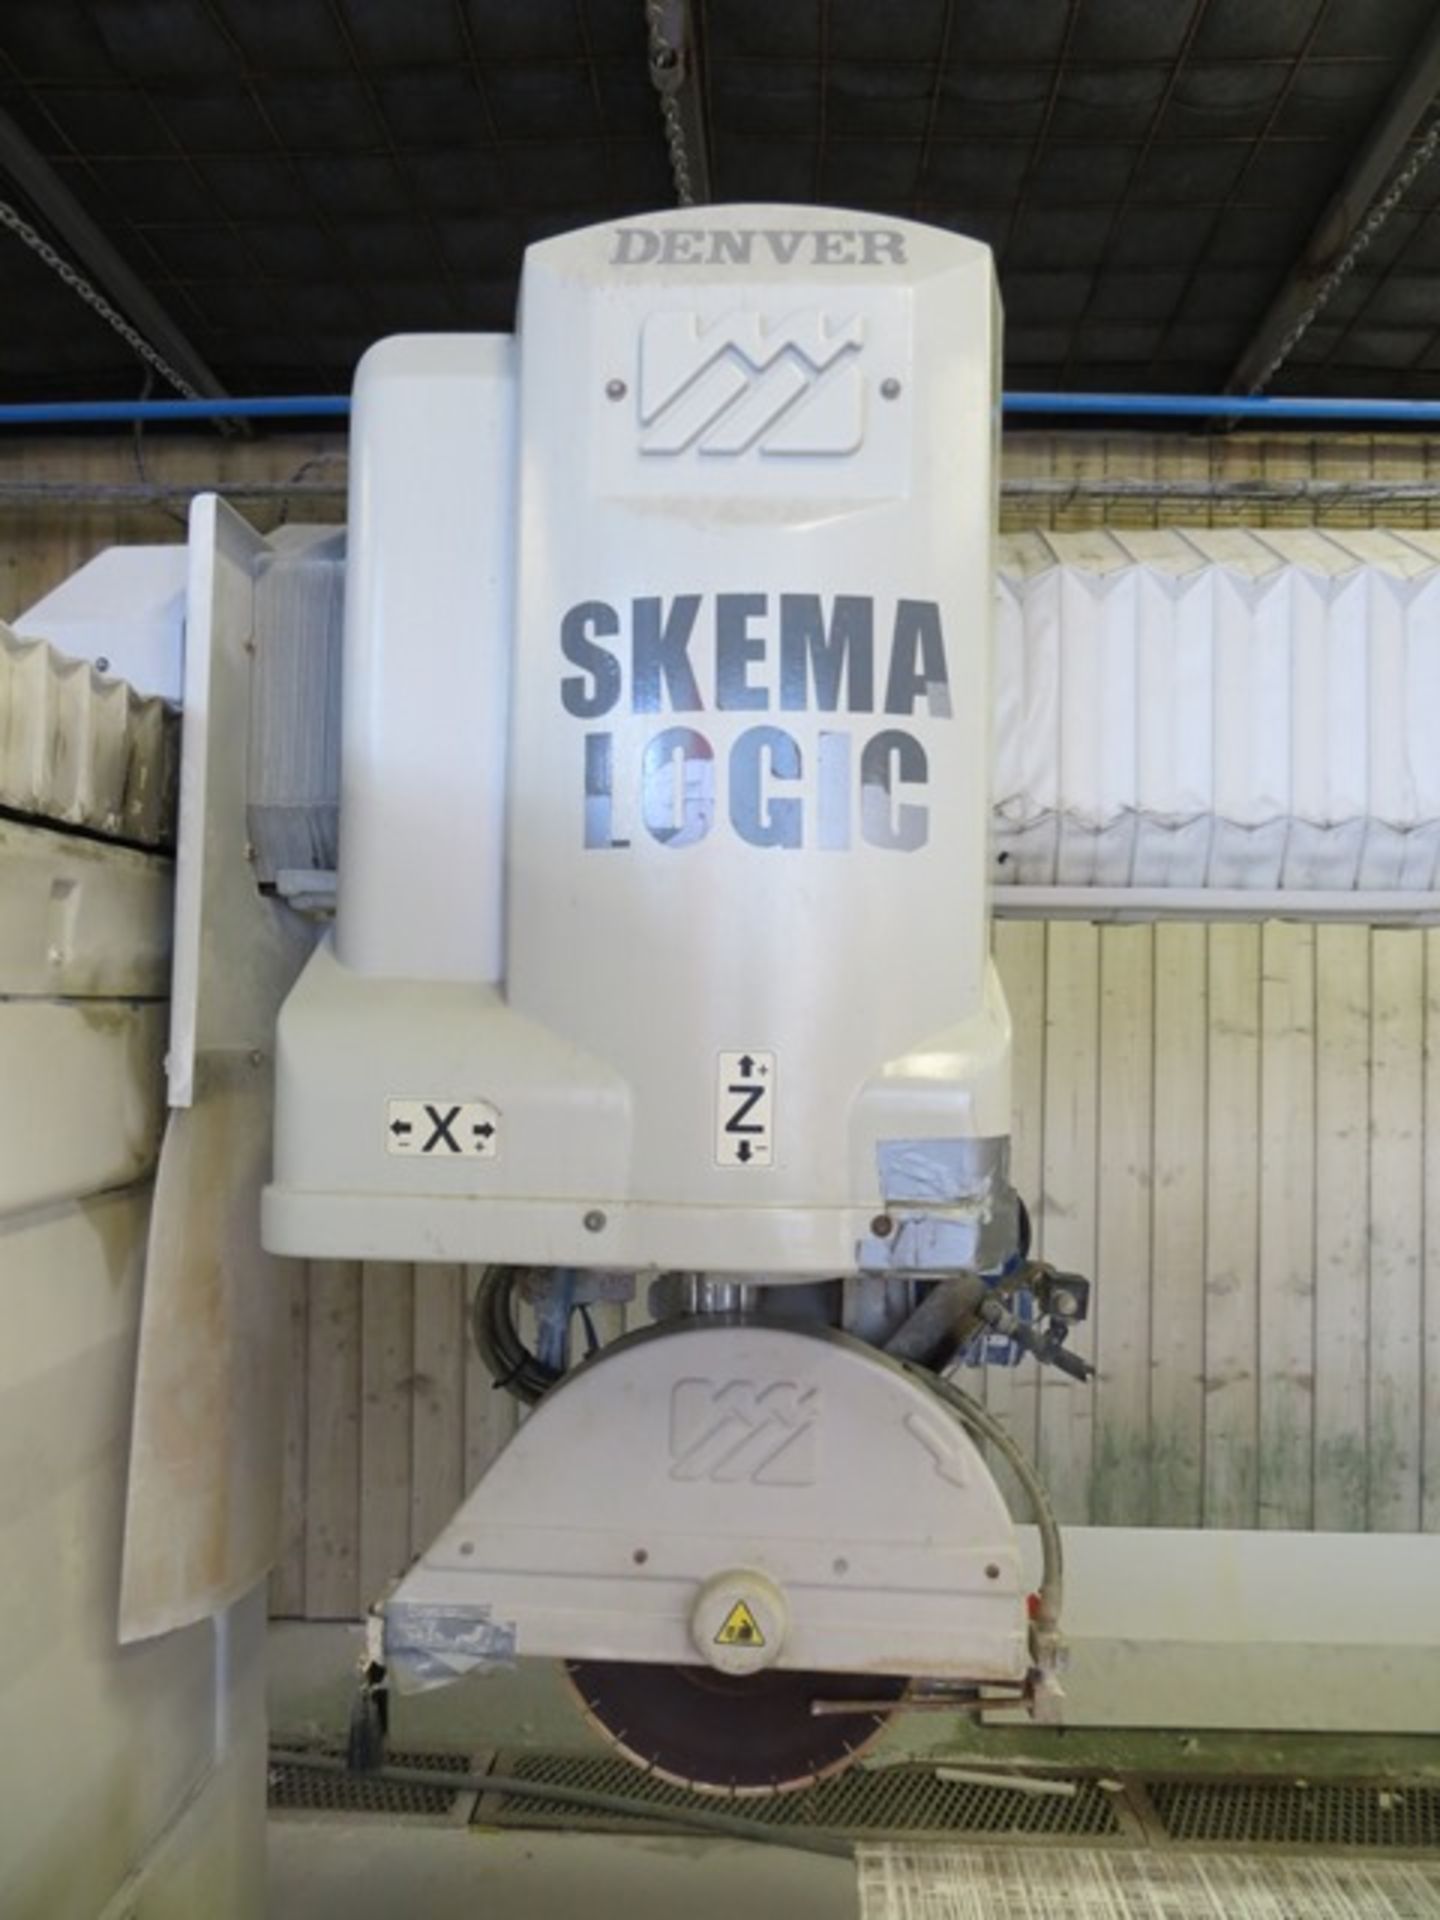 Denver Skema Logic monobloc bridge saw with wire safety guard and OSAI control panel (c2007). A work - Image 3 of 6